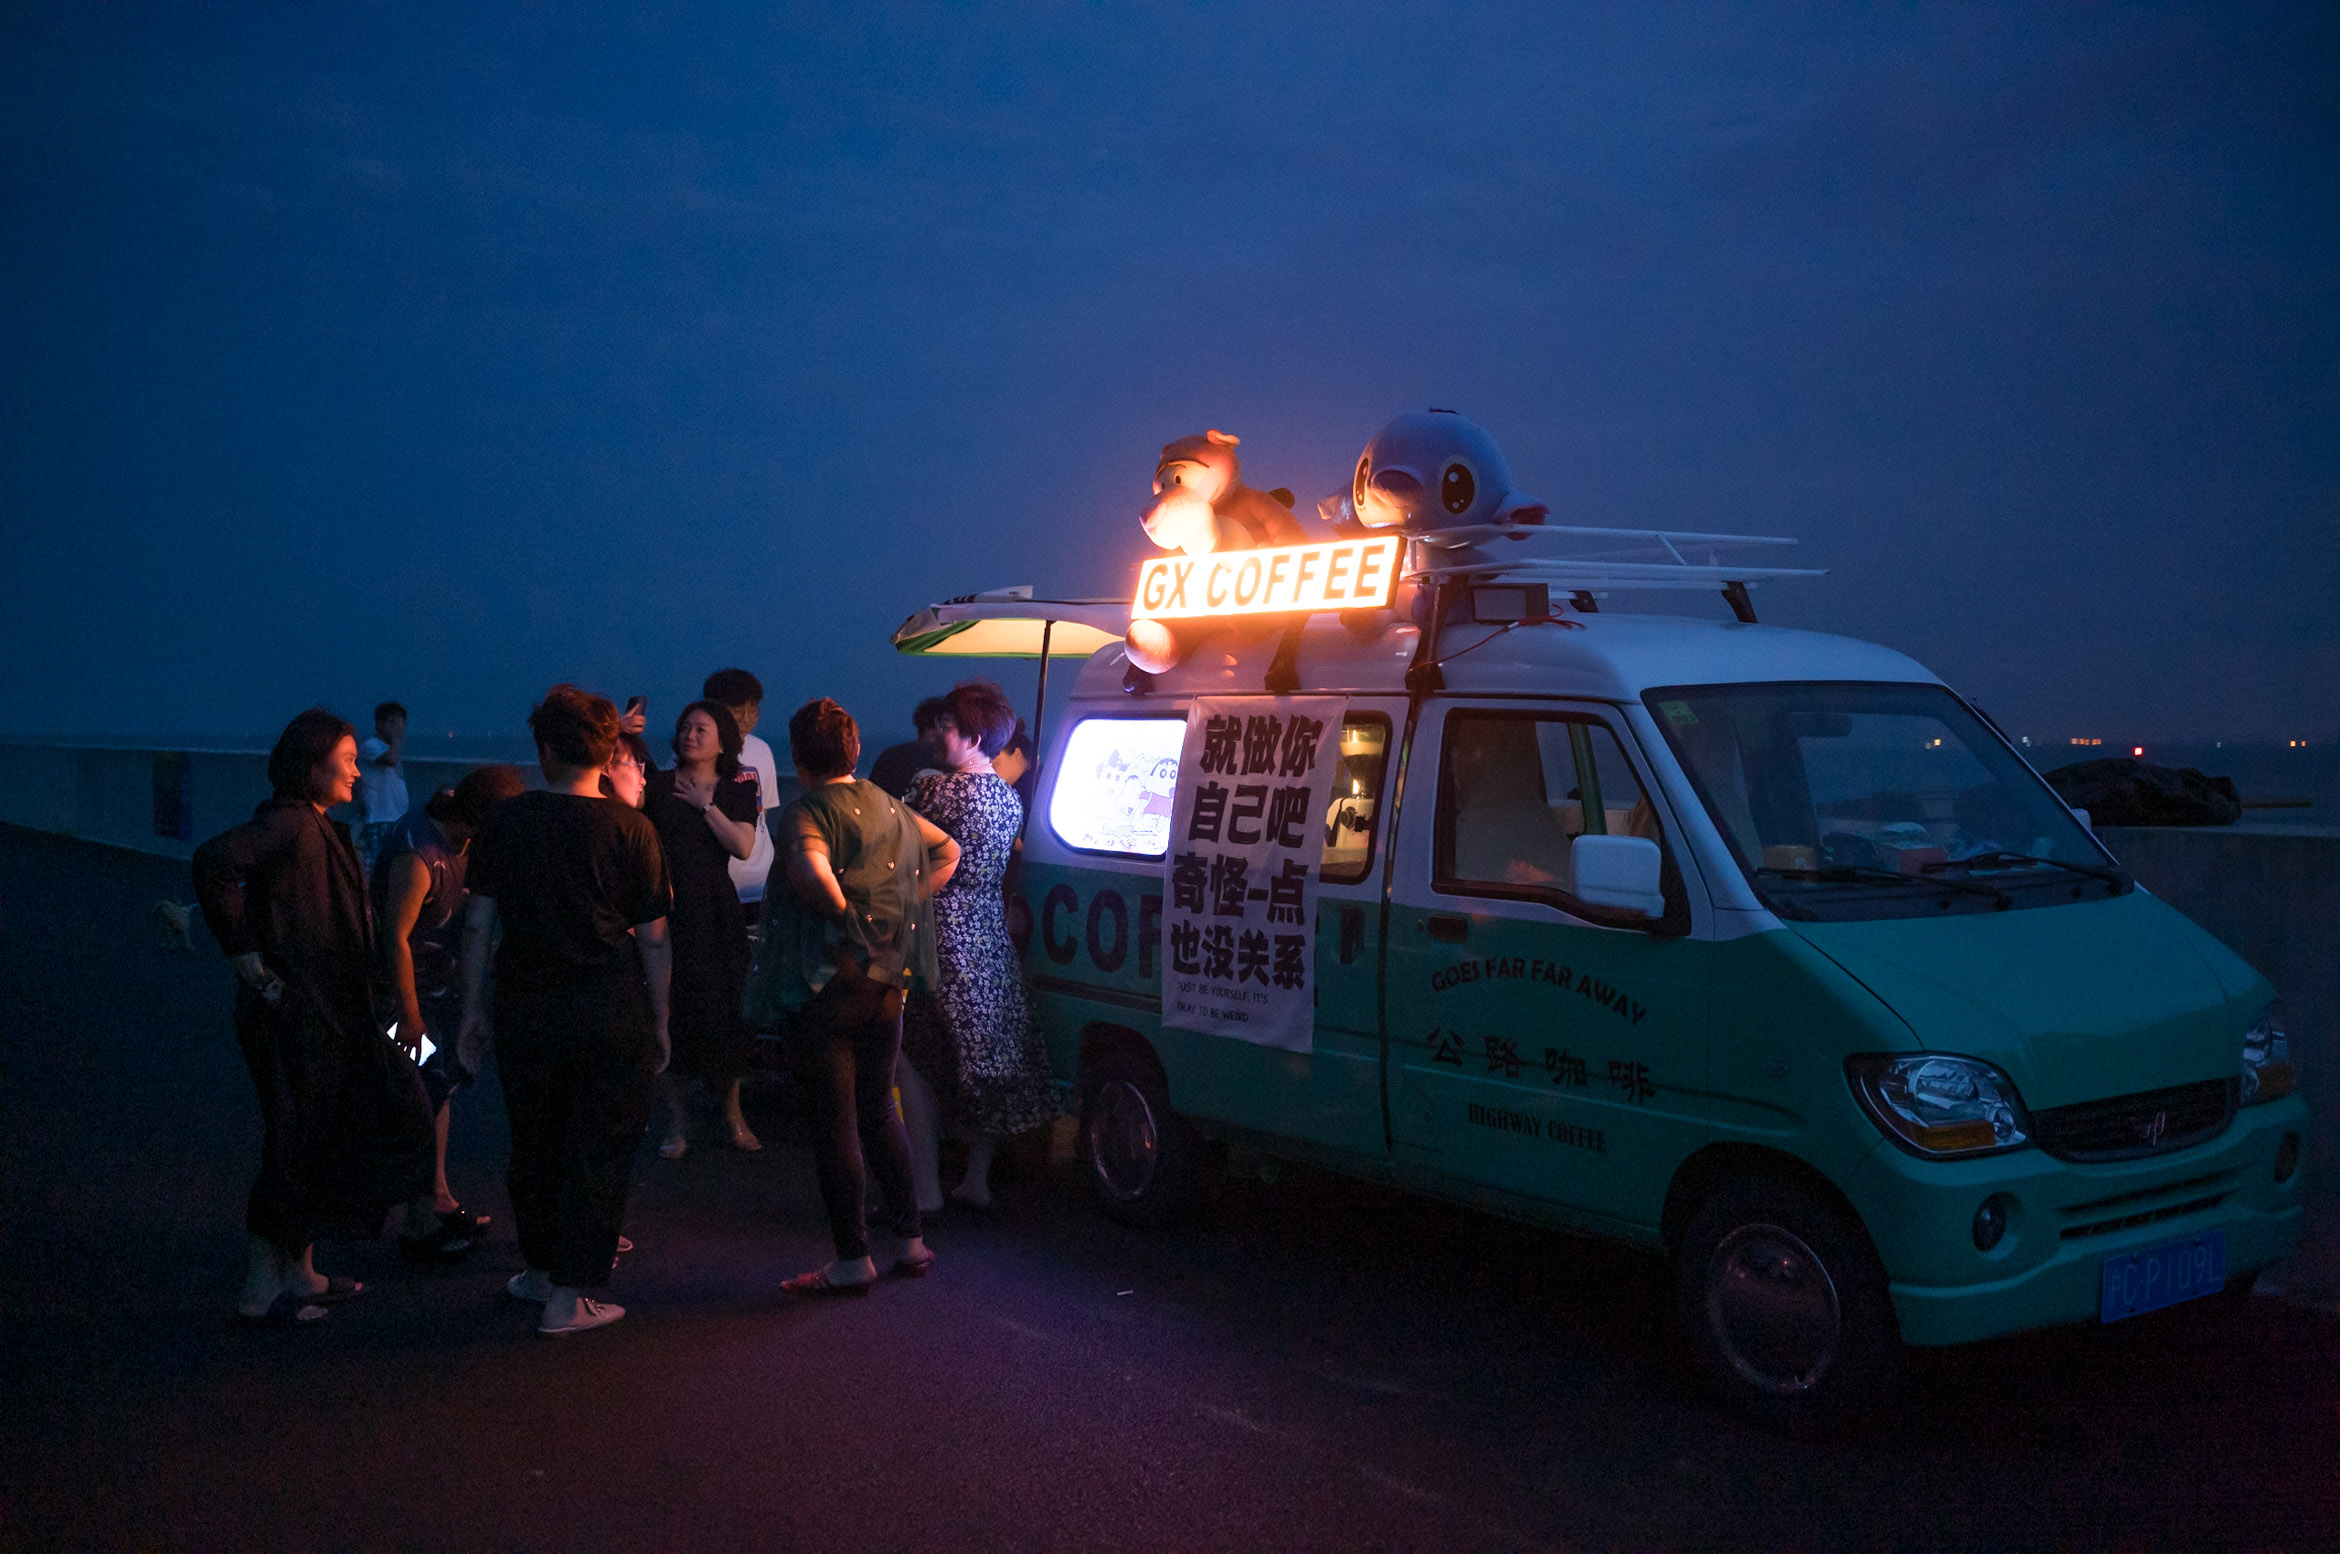 A mobile cafe in Shanghai 上海的一个移动咖啡店